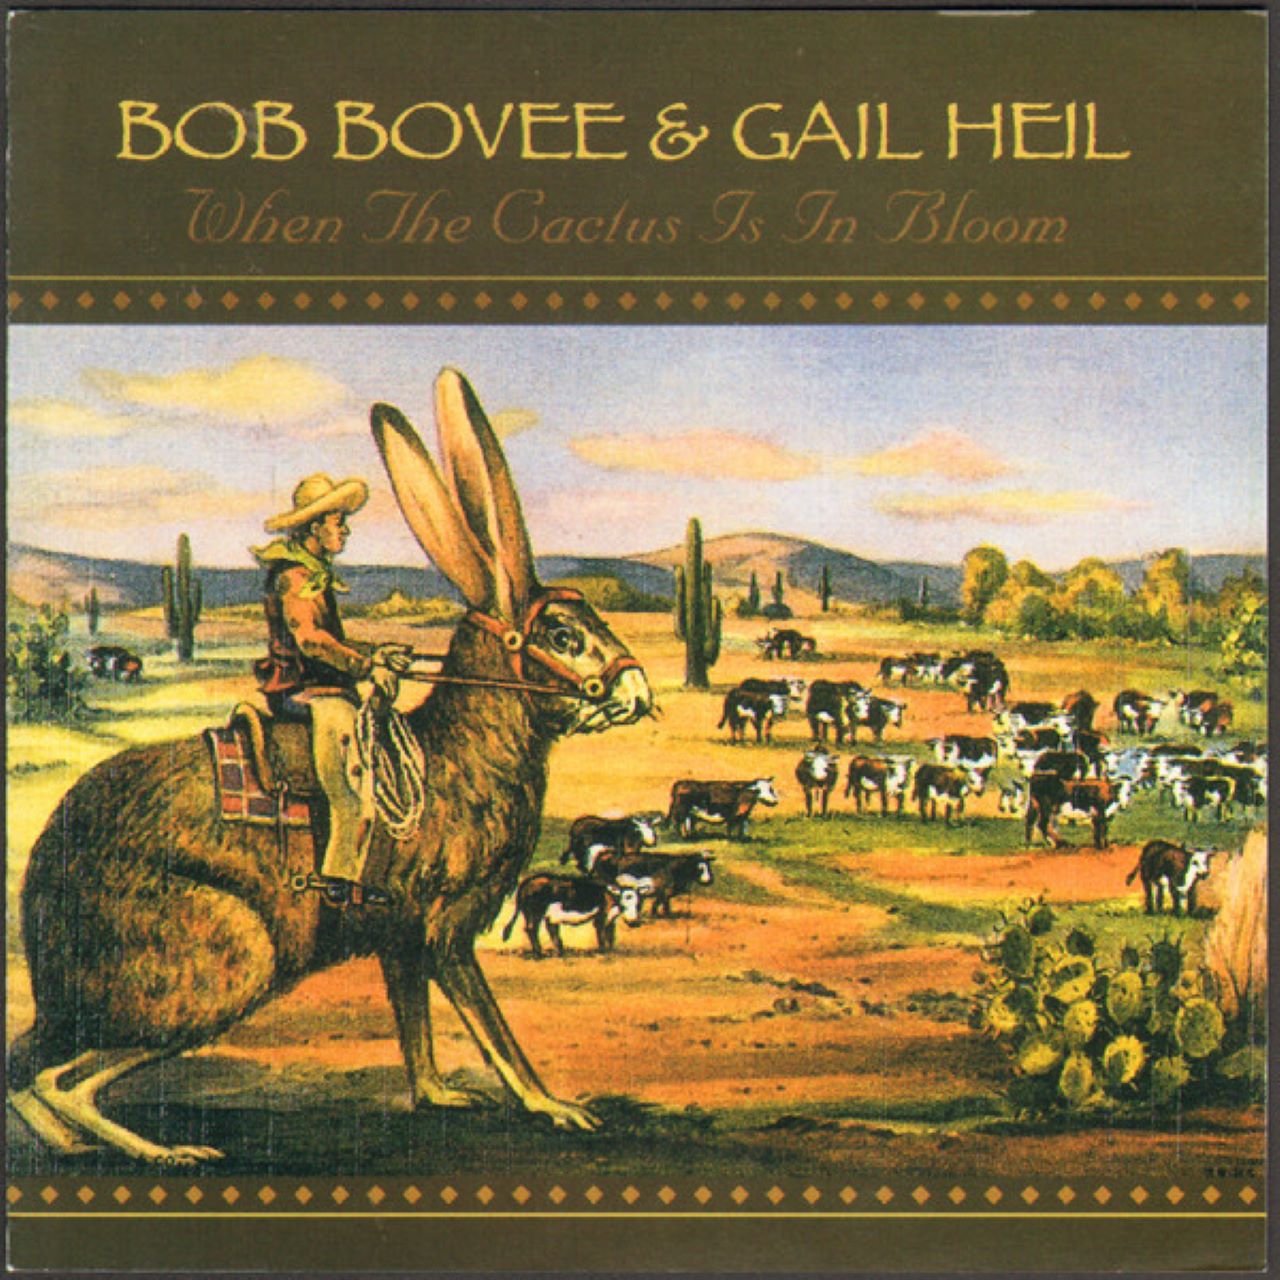 Bob Bovee & Gail Heil - When The Cactus Is In Bloom cover album